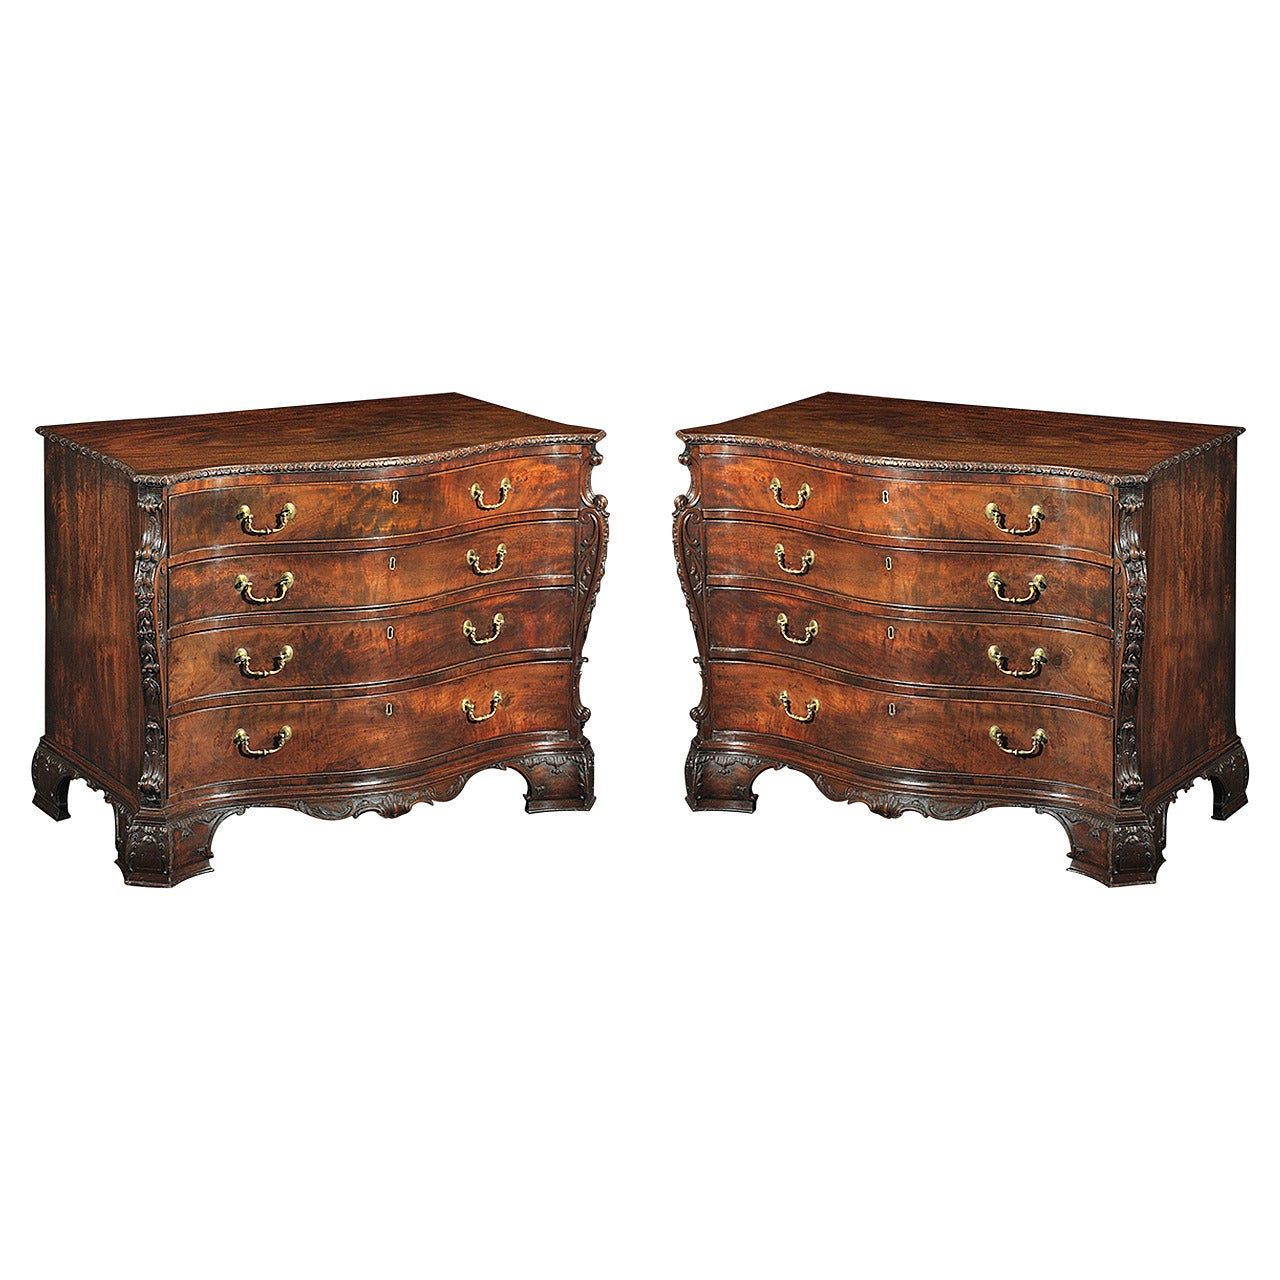 Two Superb George III Mahogany Serpentine Dressing Commodes For Sale